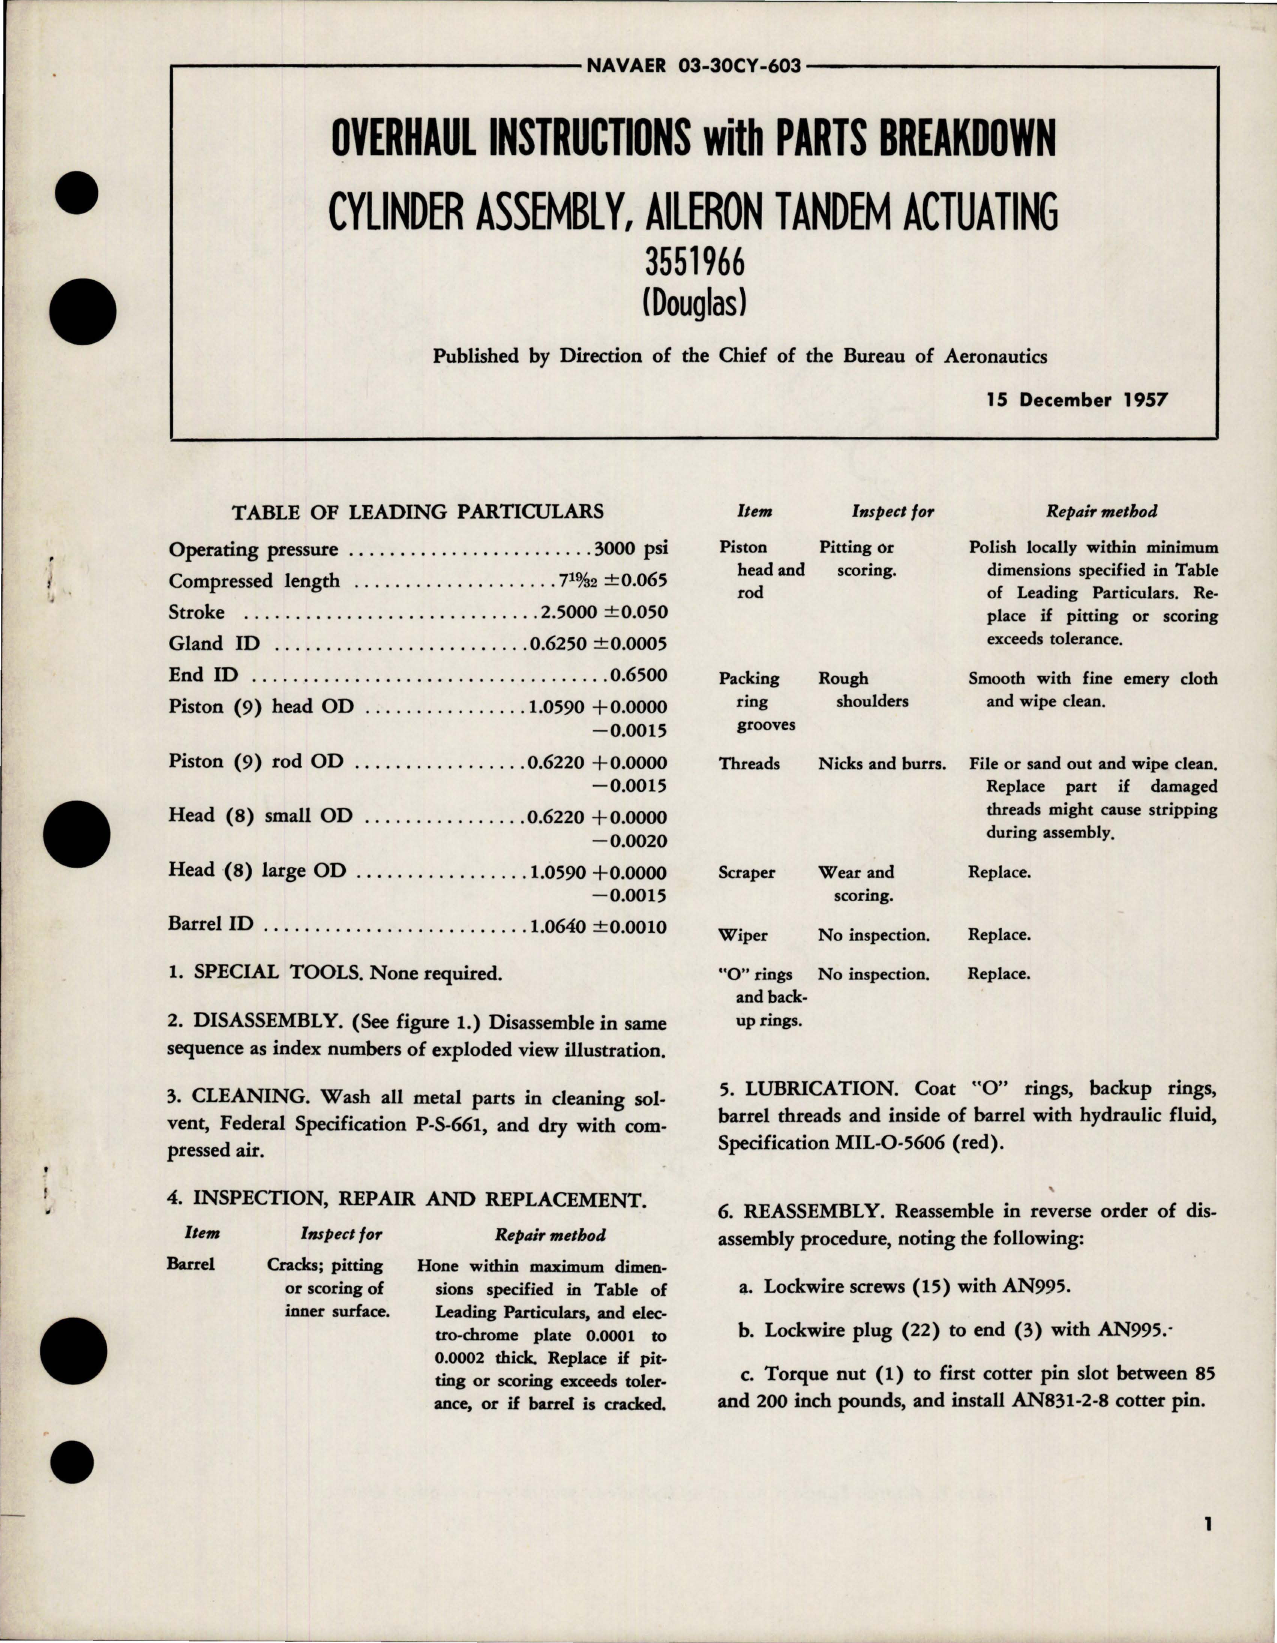 Sample page 1 from AirCorps Library document: Overhaul Instructions with Parts for Aileron Tandem Actuating Cylinder Assembly - 3551966 